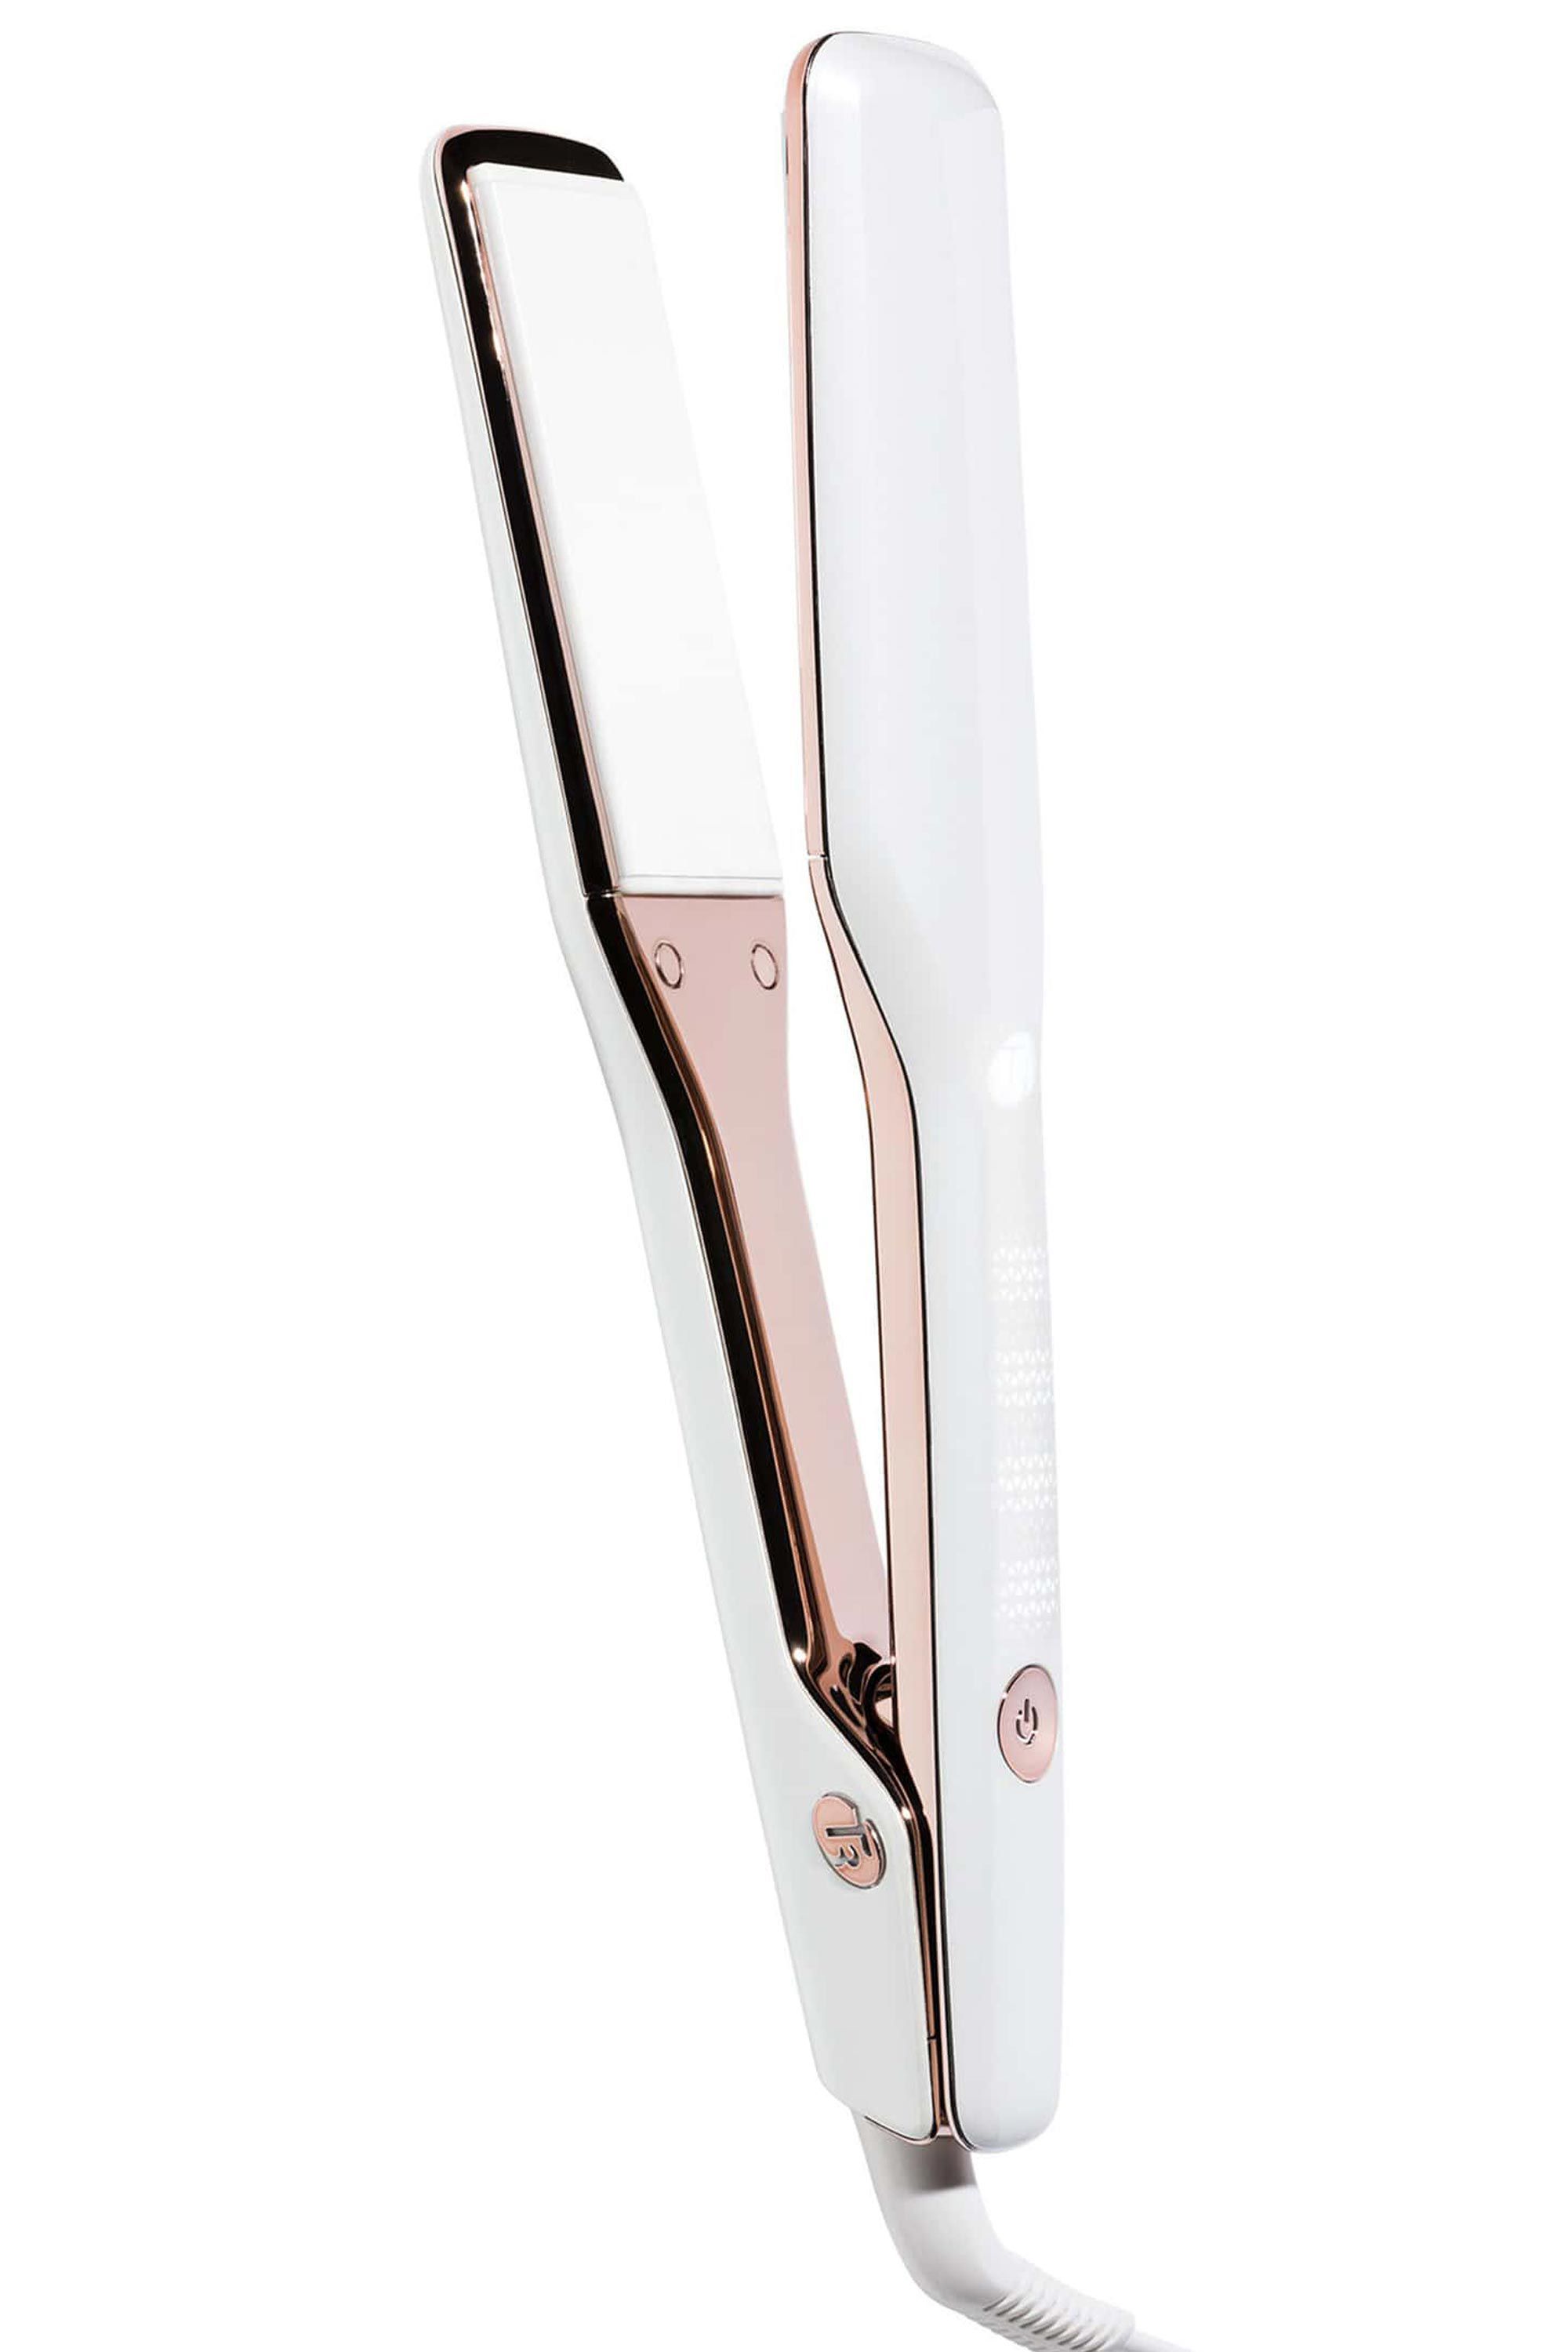 10 Things I Wish I Knew About Royale Hair Straightener